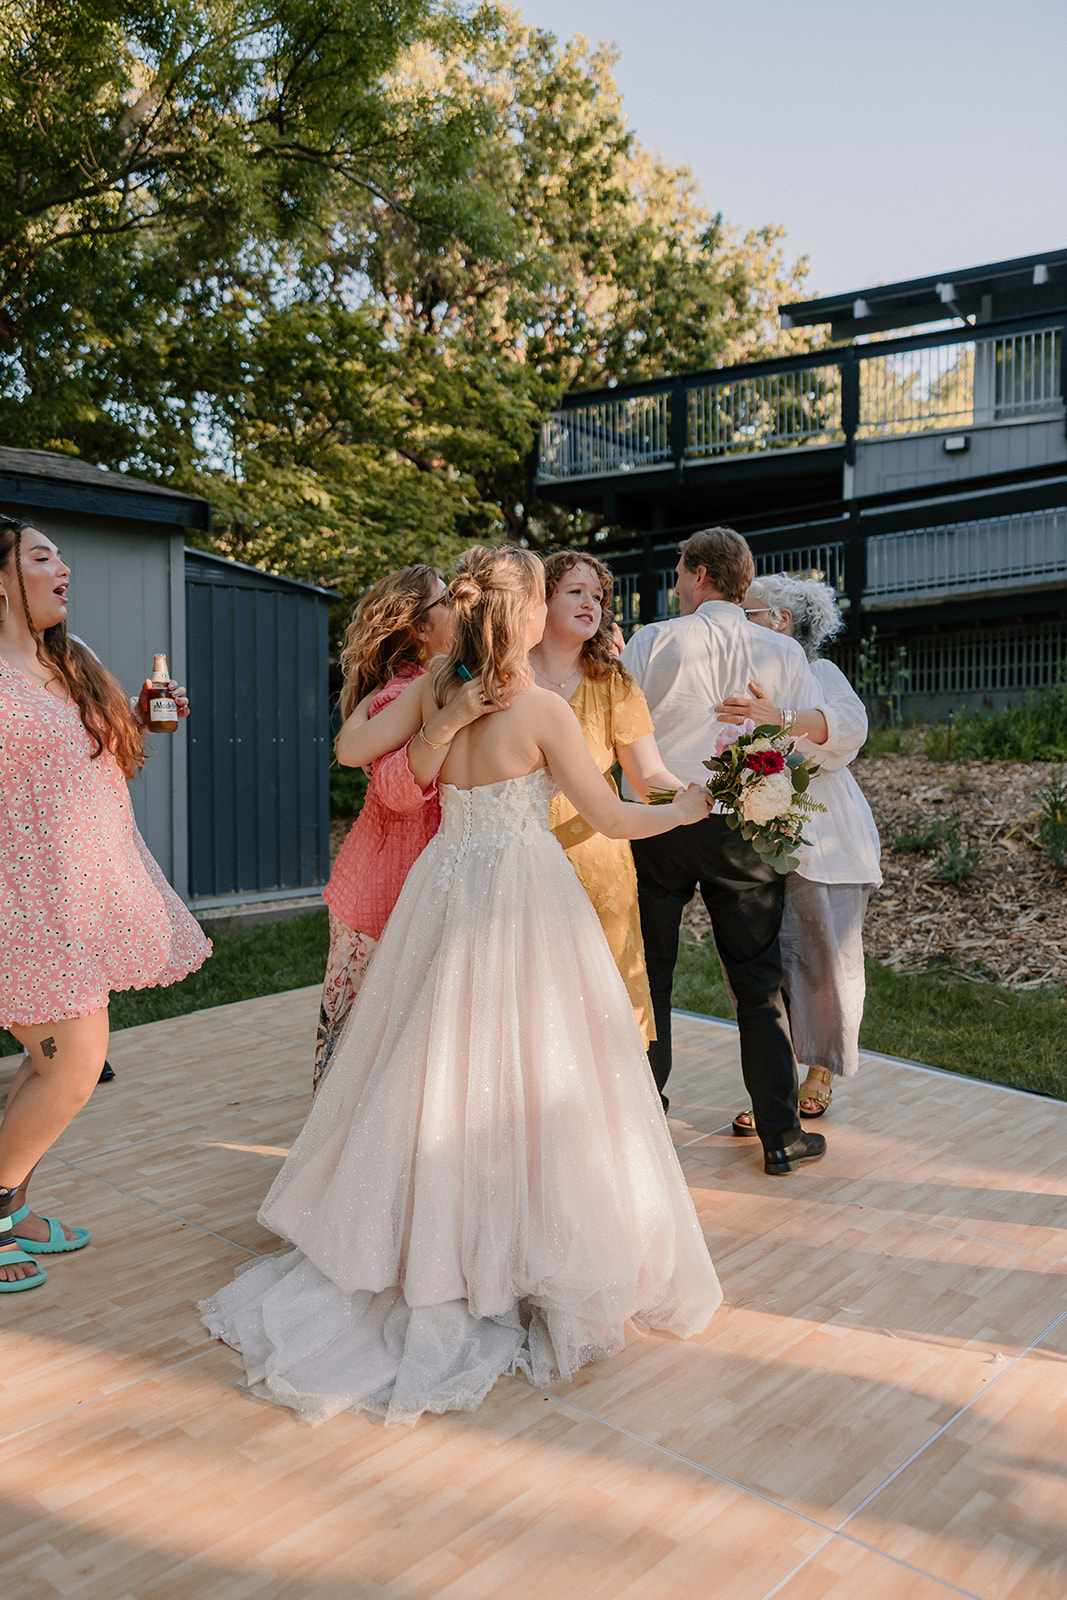 A group of people, including adults and children, are dancing outdoors on a wooden platform. at a wedding at the gardens at heather farms